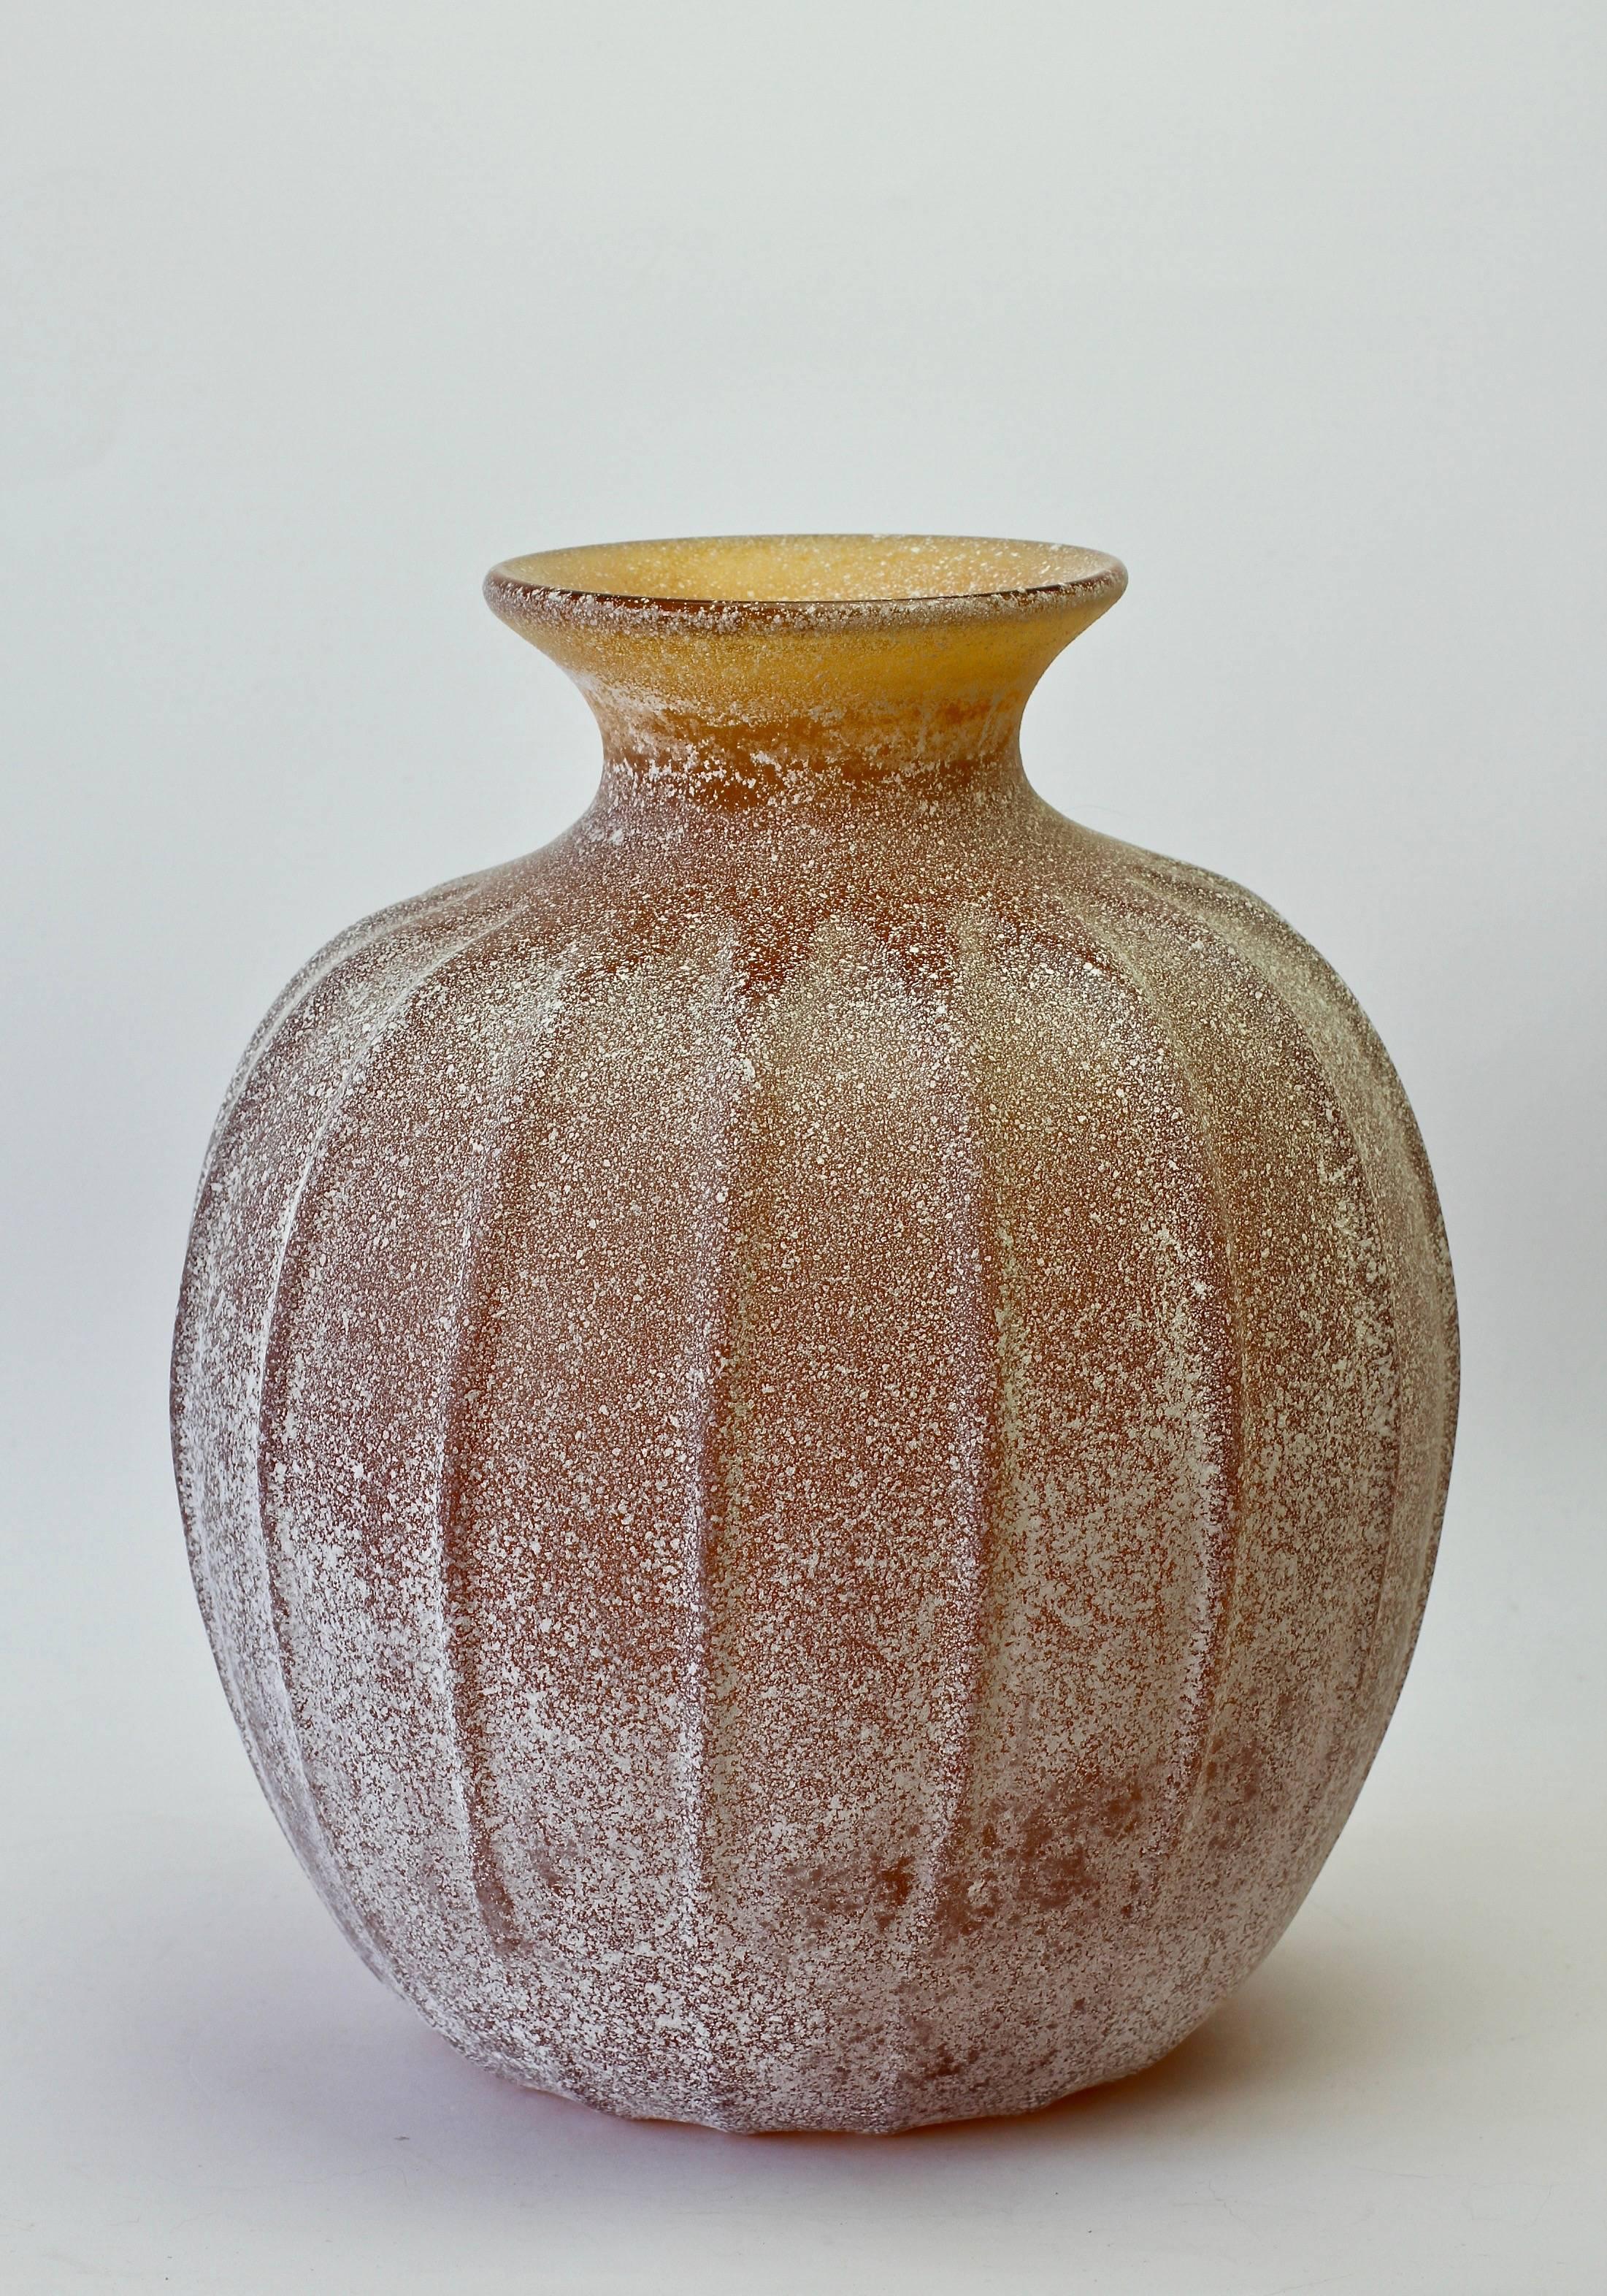 Large 'a Scavo' brown amber colored / coloured glass vessel or vase by Seguso Vetri d'Arte Murano, Italy. Elegant in form and showing extraordinary craftmanship with the use of the 'Scavo' technique to replicate to look and feel of ancient Roman